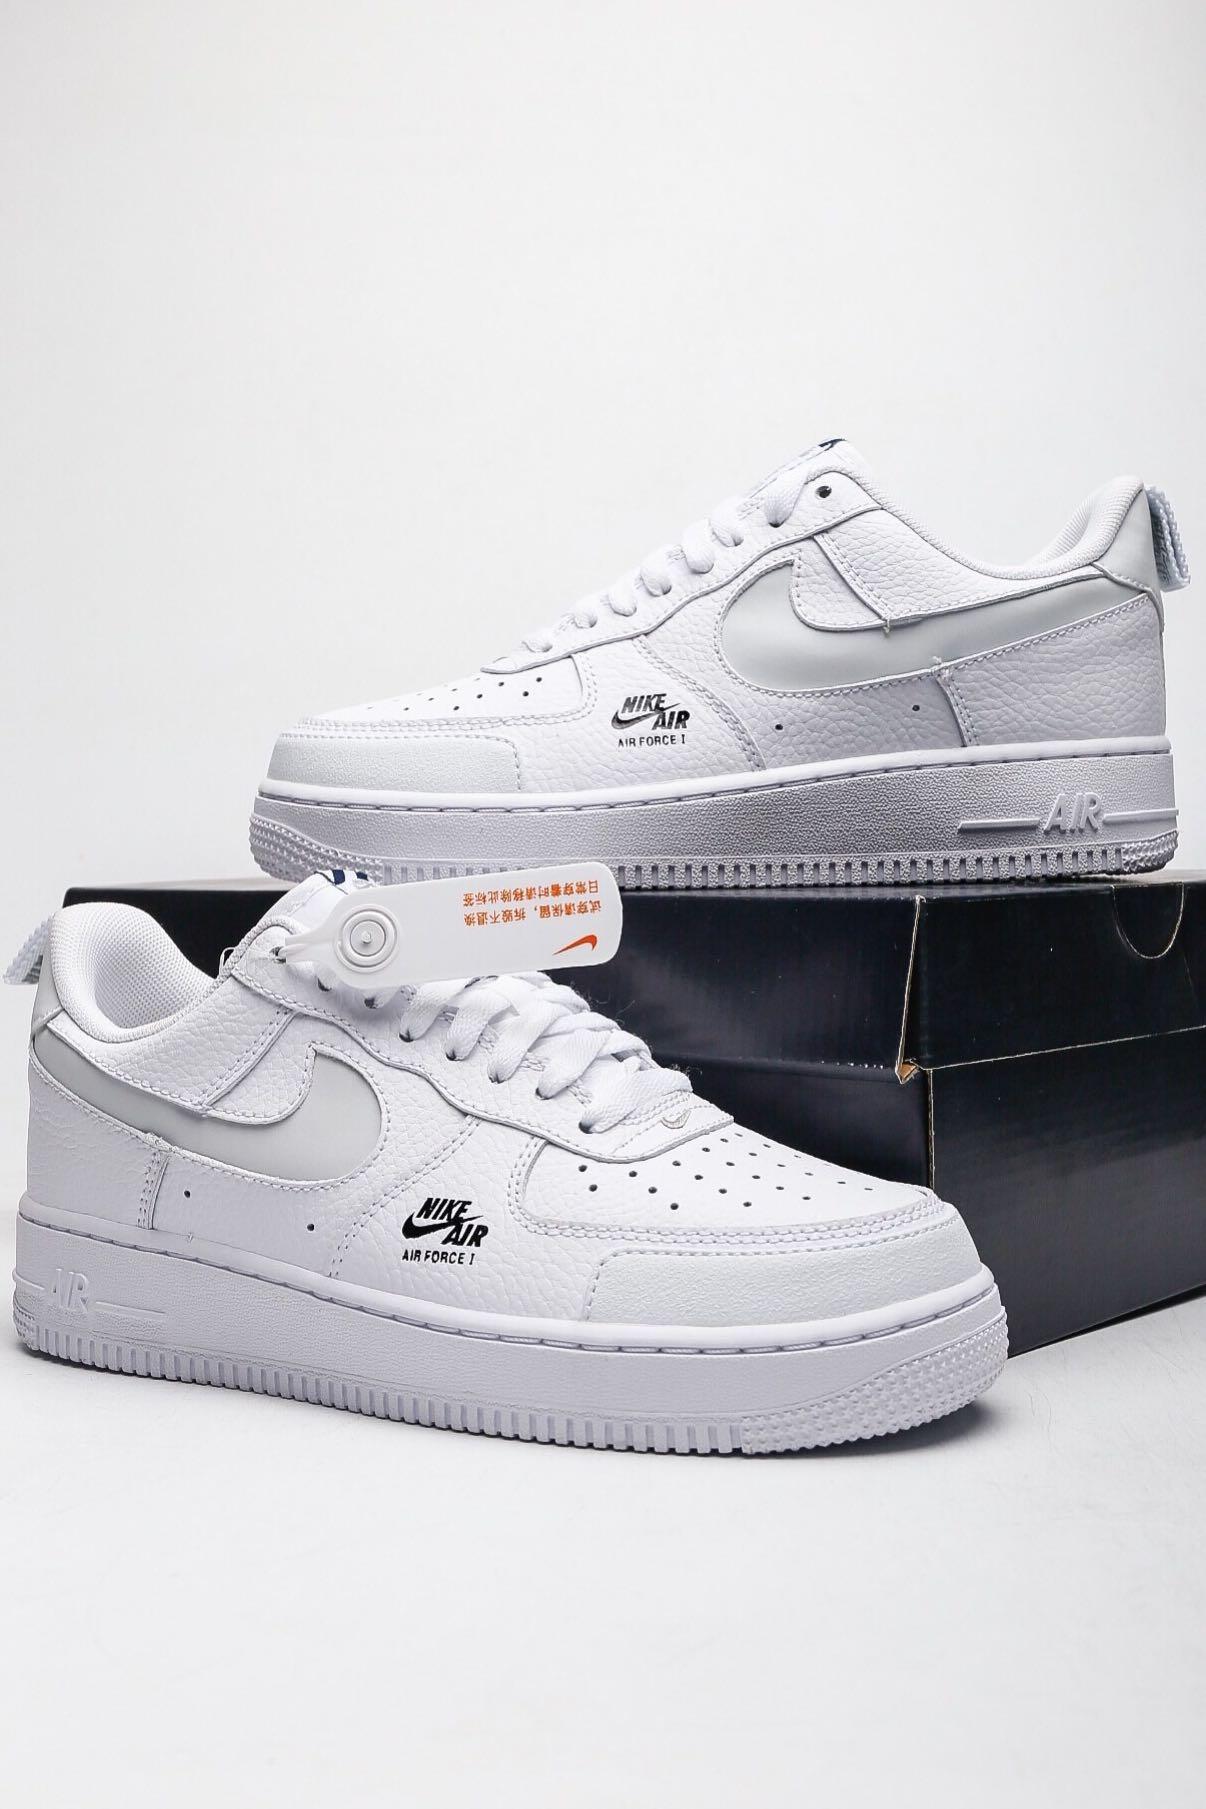 nike air force one 7 lv8 utility low